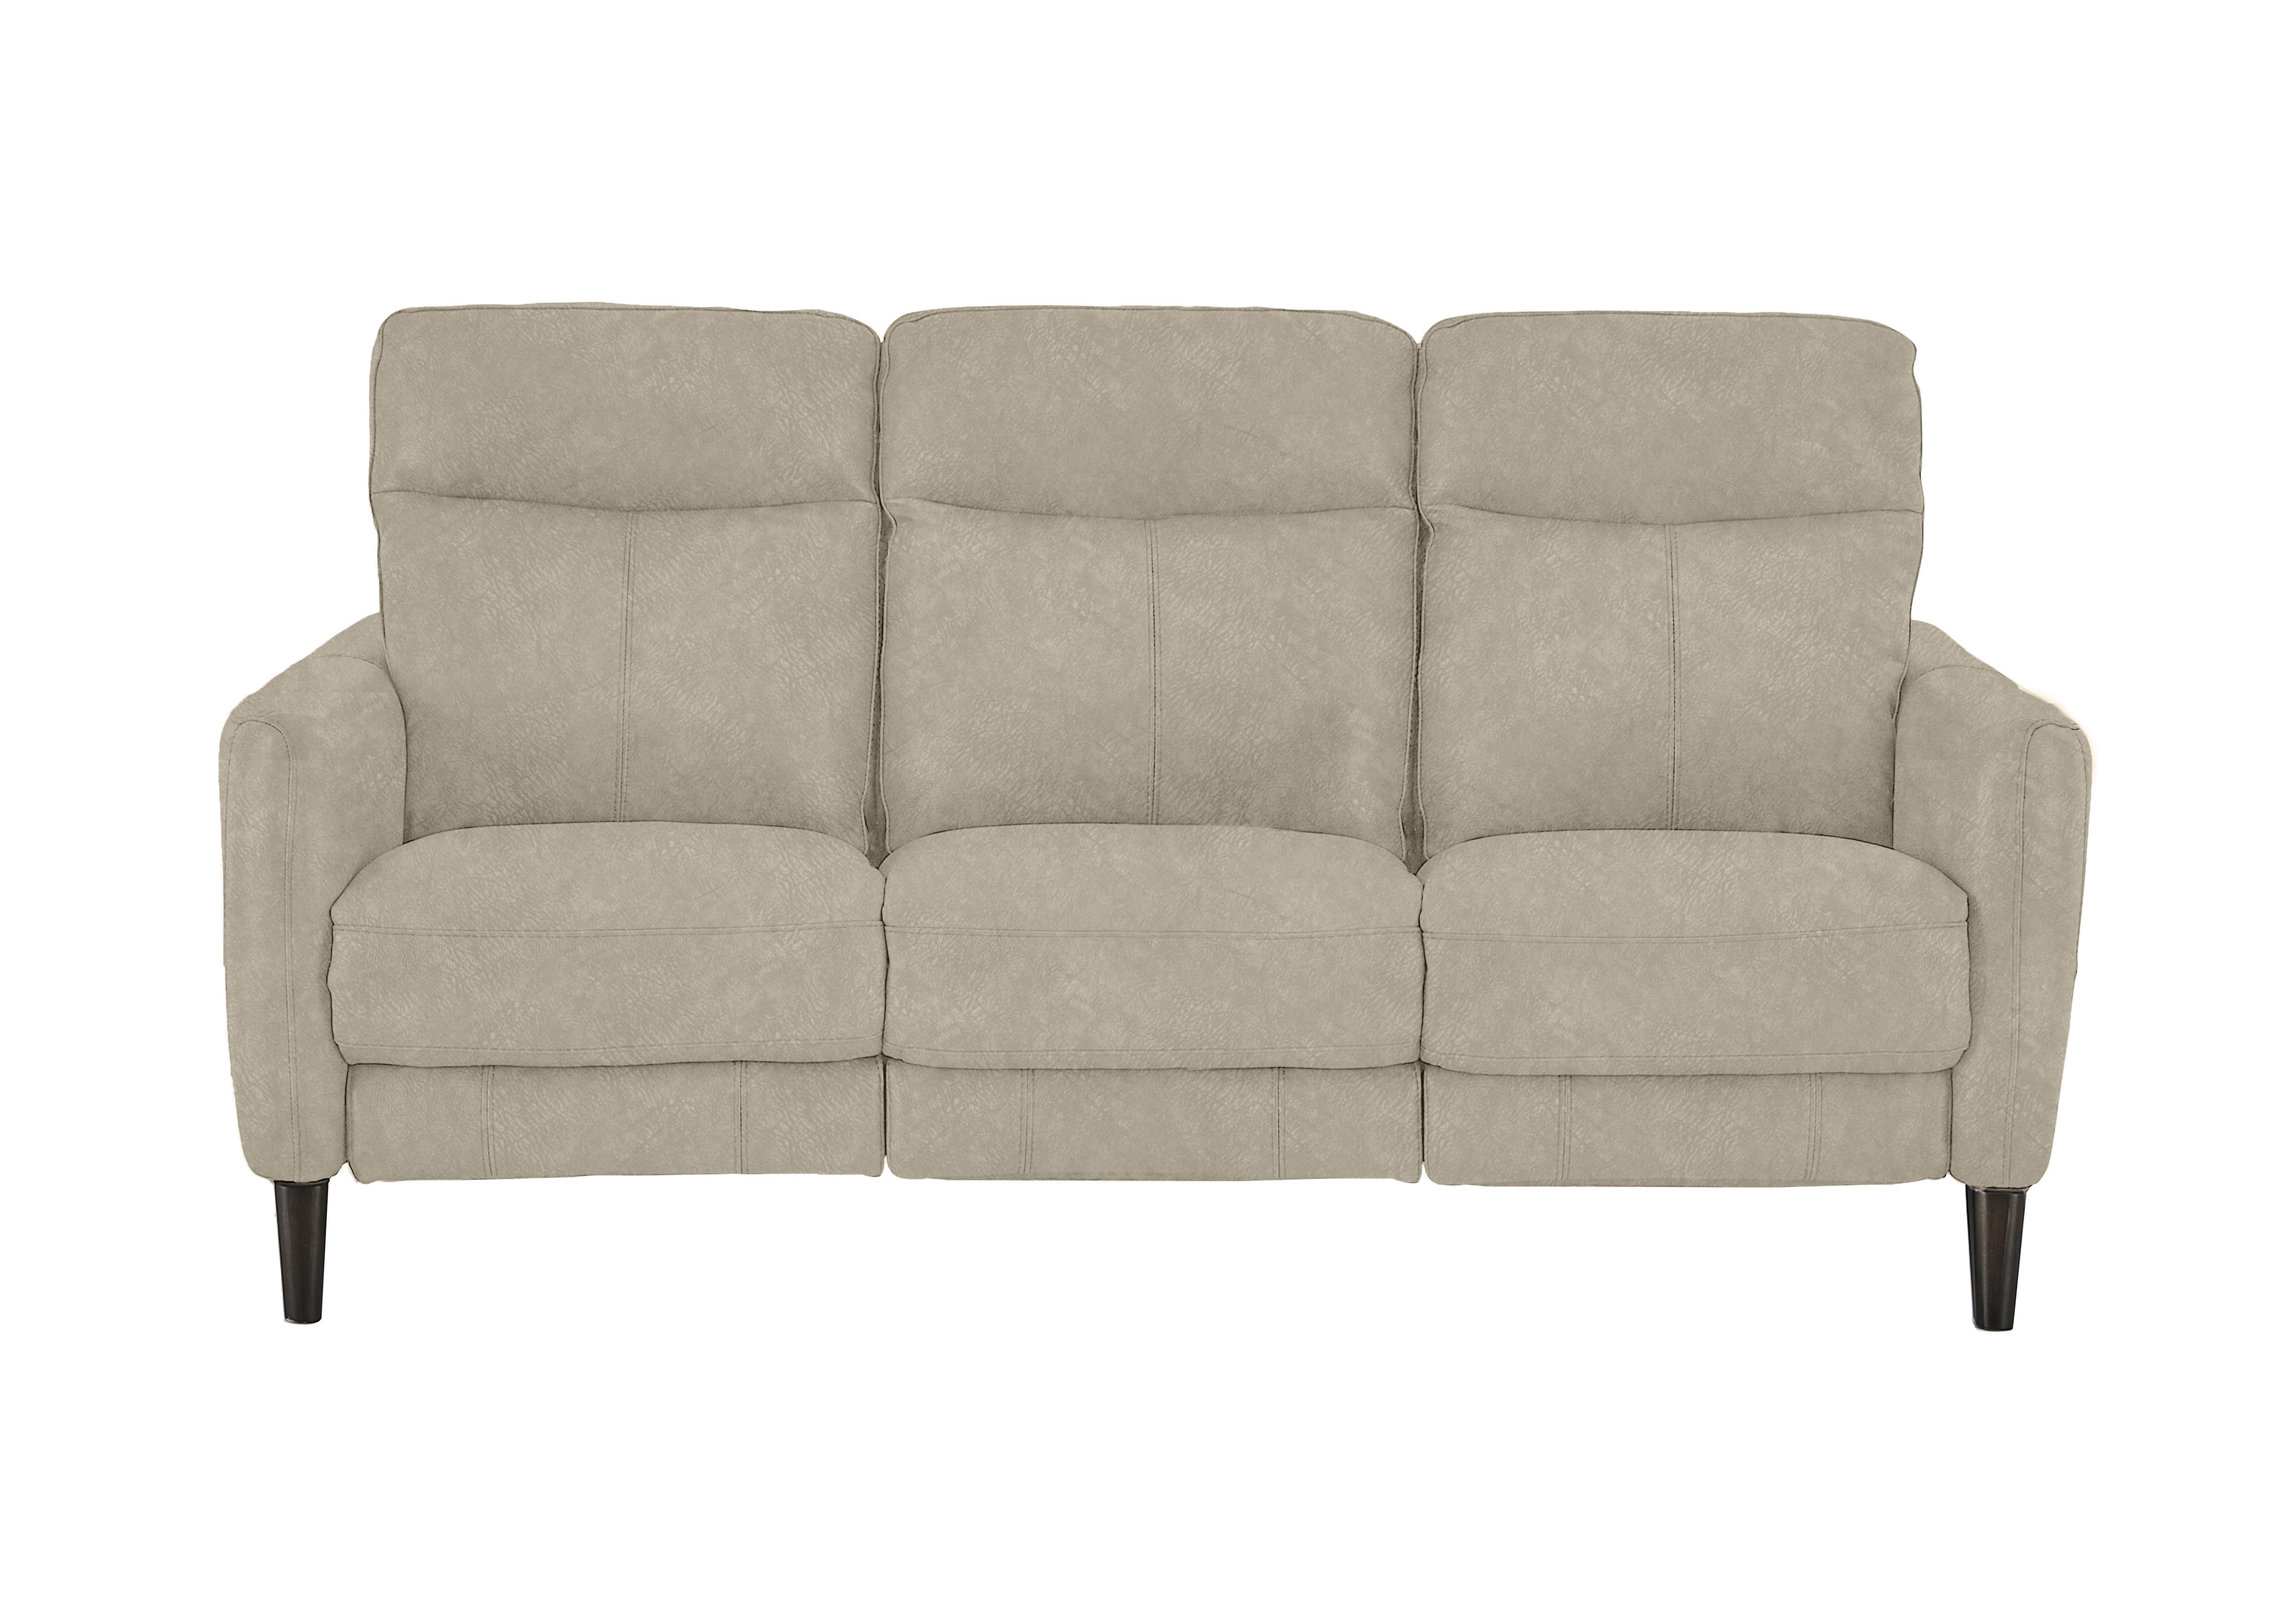 Compact Collection Petit 3 Seater Fabric Sofa in Bfa-Bnn-R26 Fv2 Cream on Furniture Village